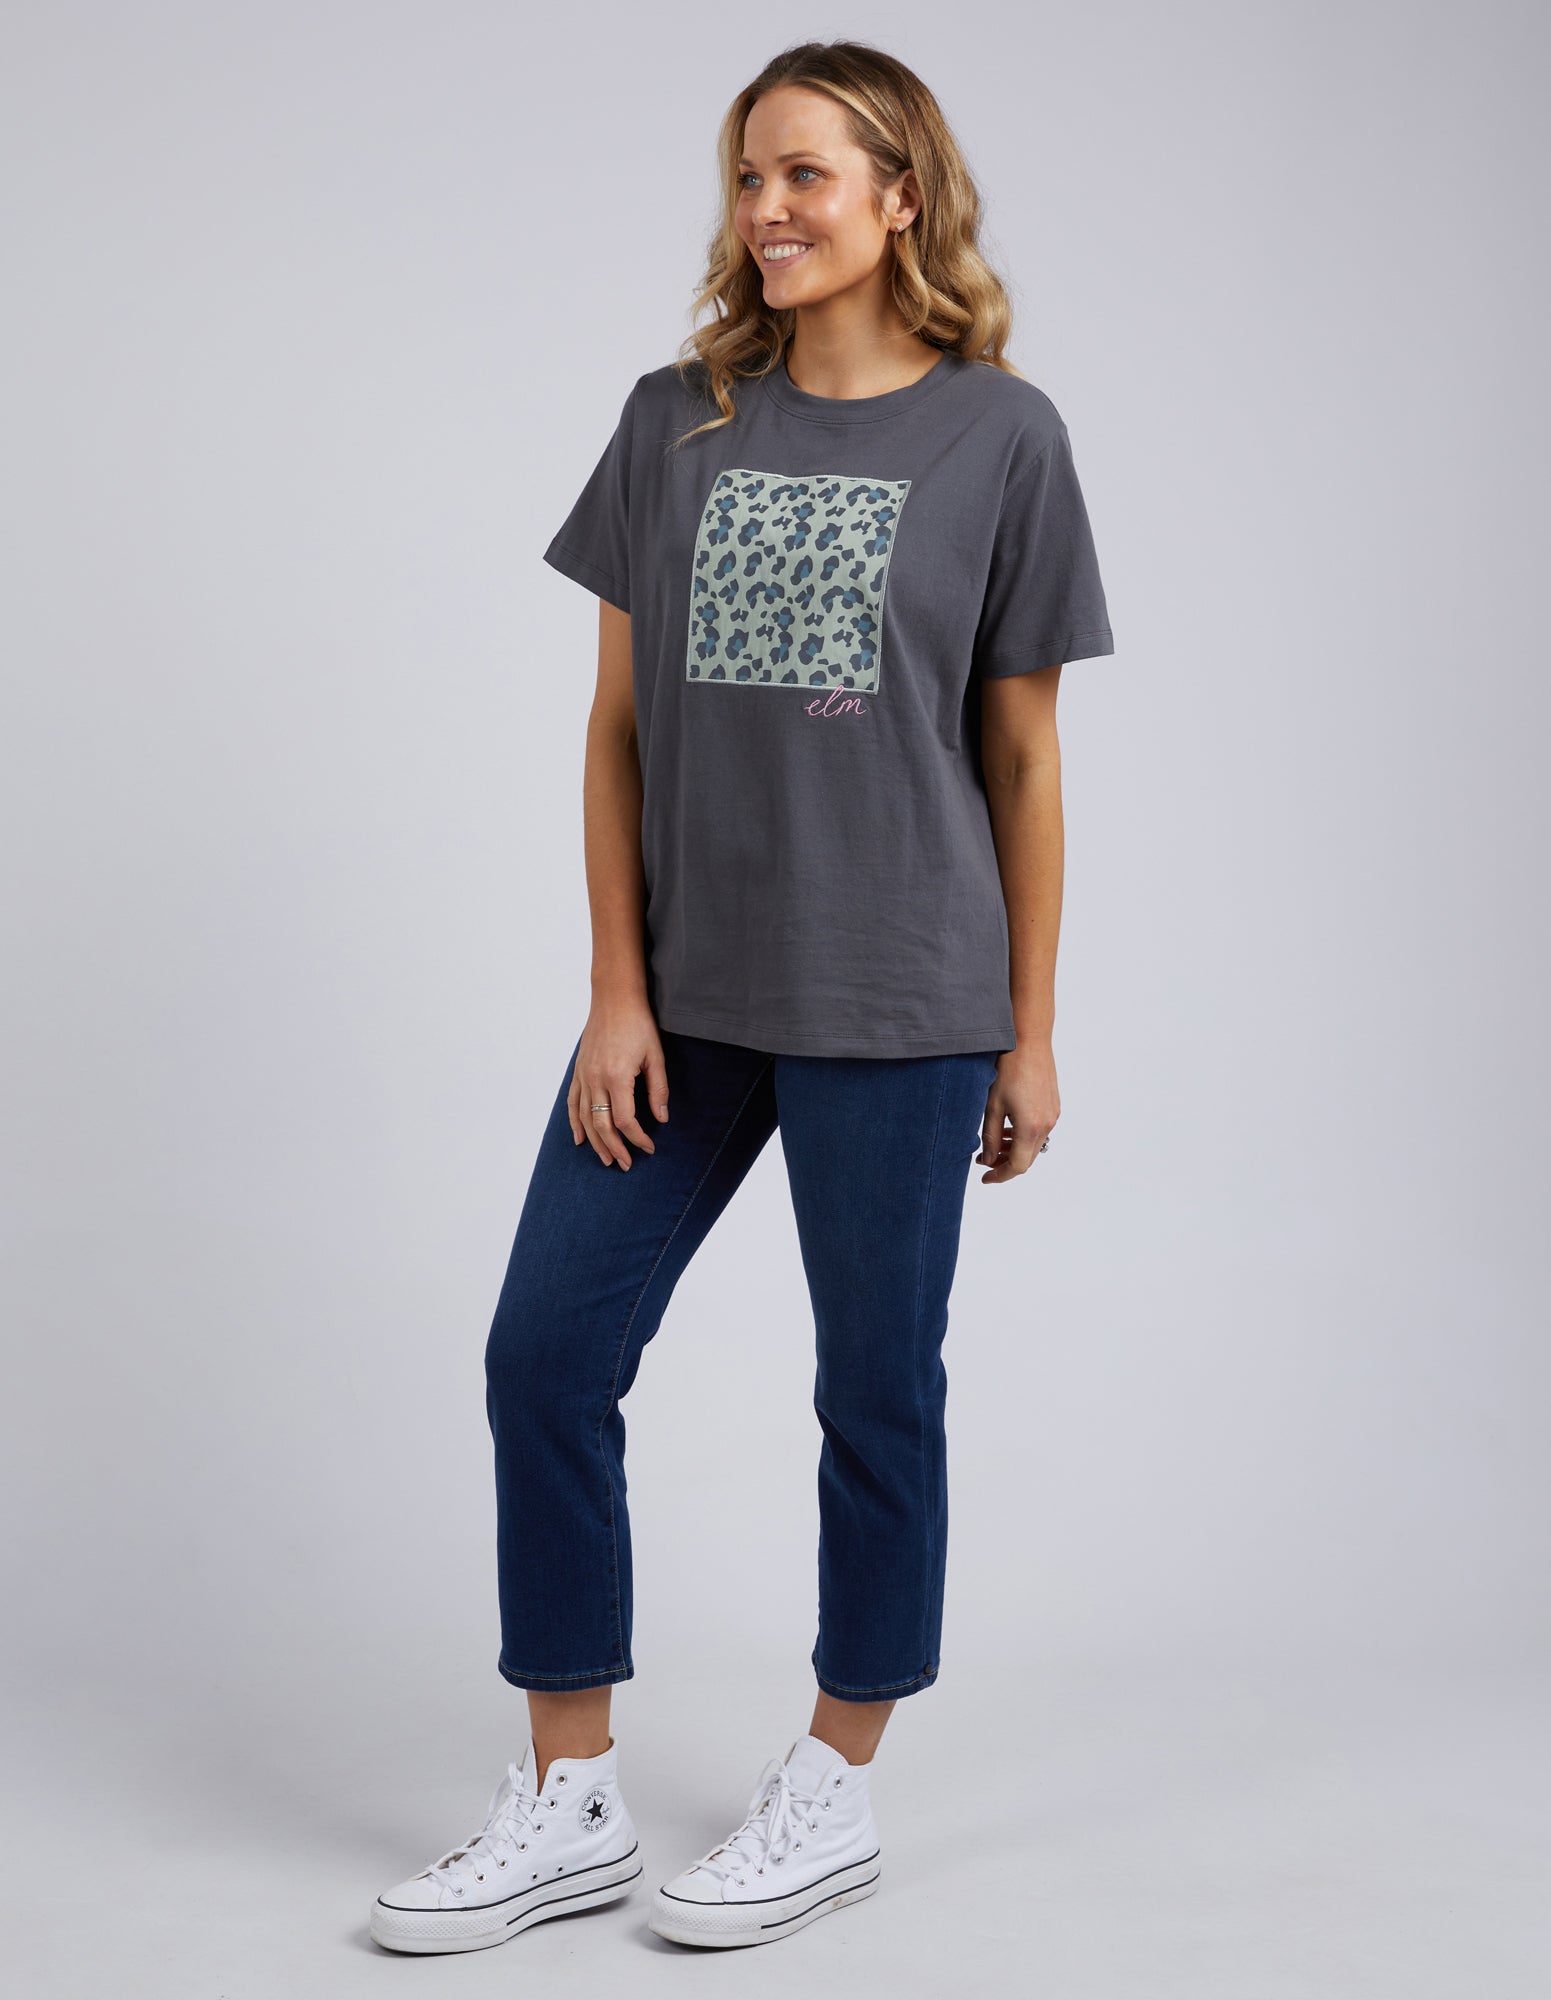 Wild About You Tee Charcoal